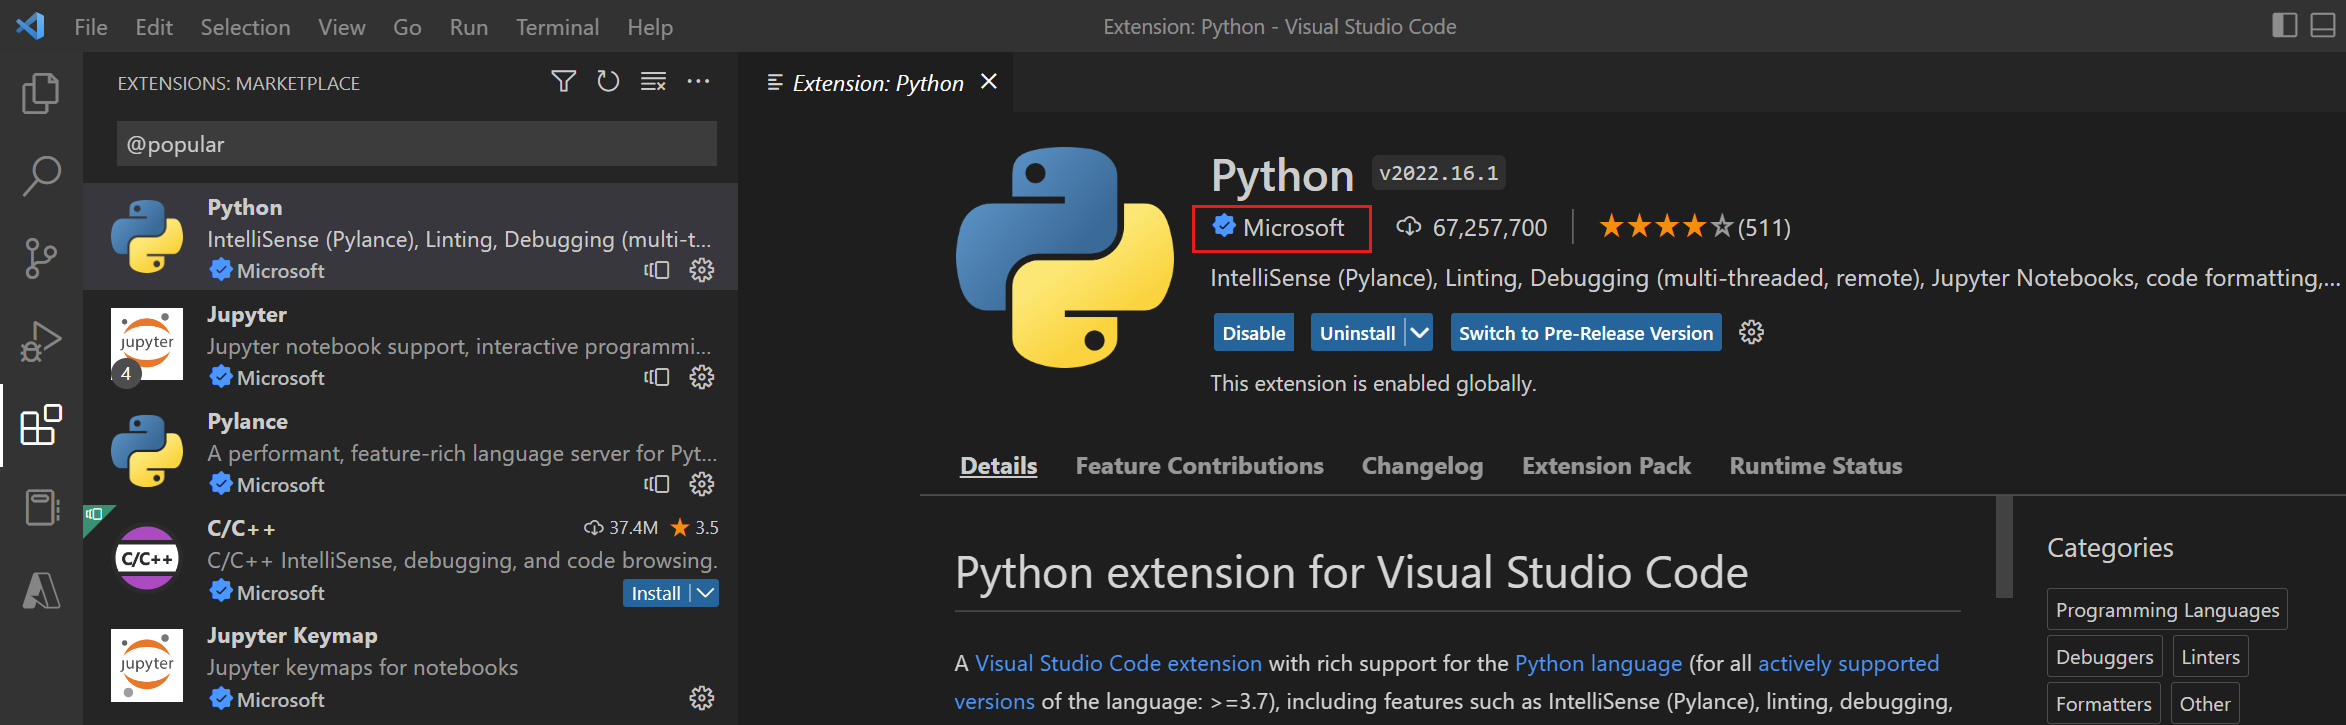 Screenshot of Visual Studio Code with the Extensions Marketplace view displayed and the Python extension published by Microsoft in view.